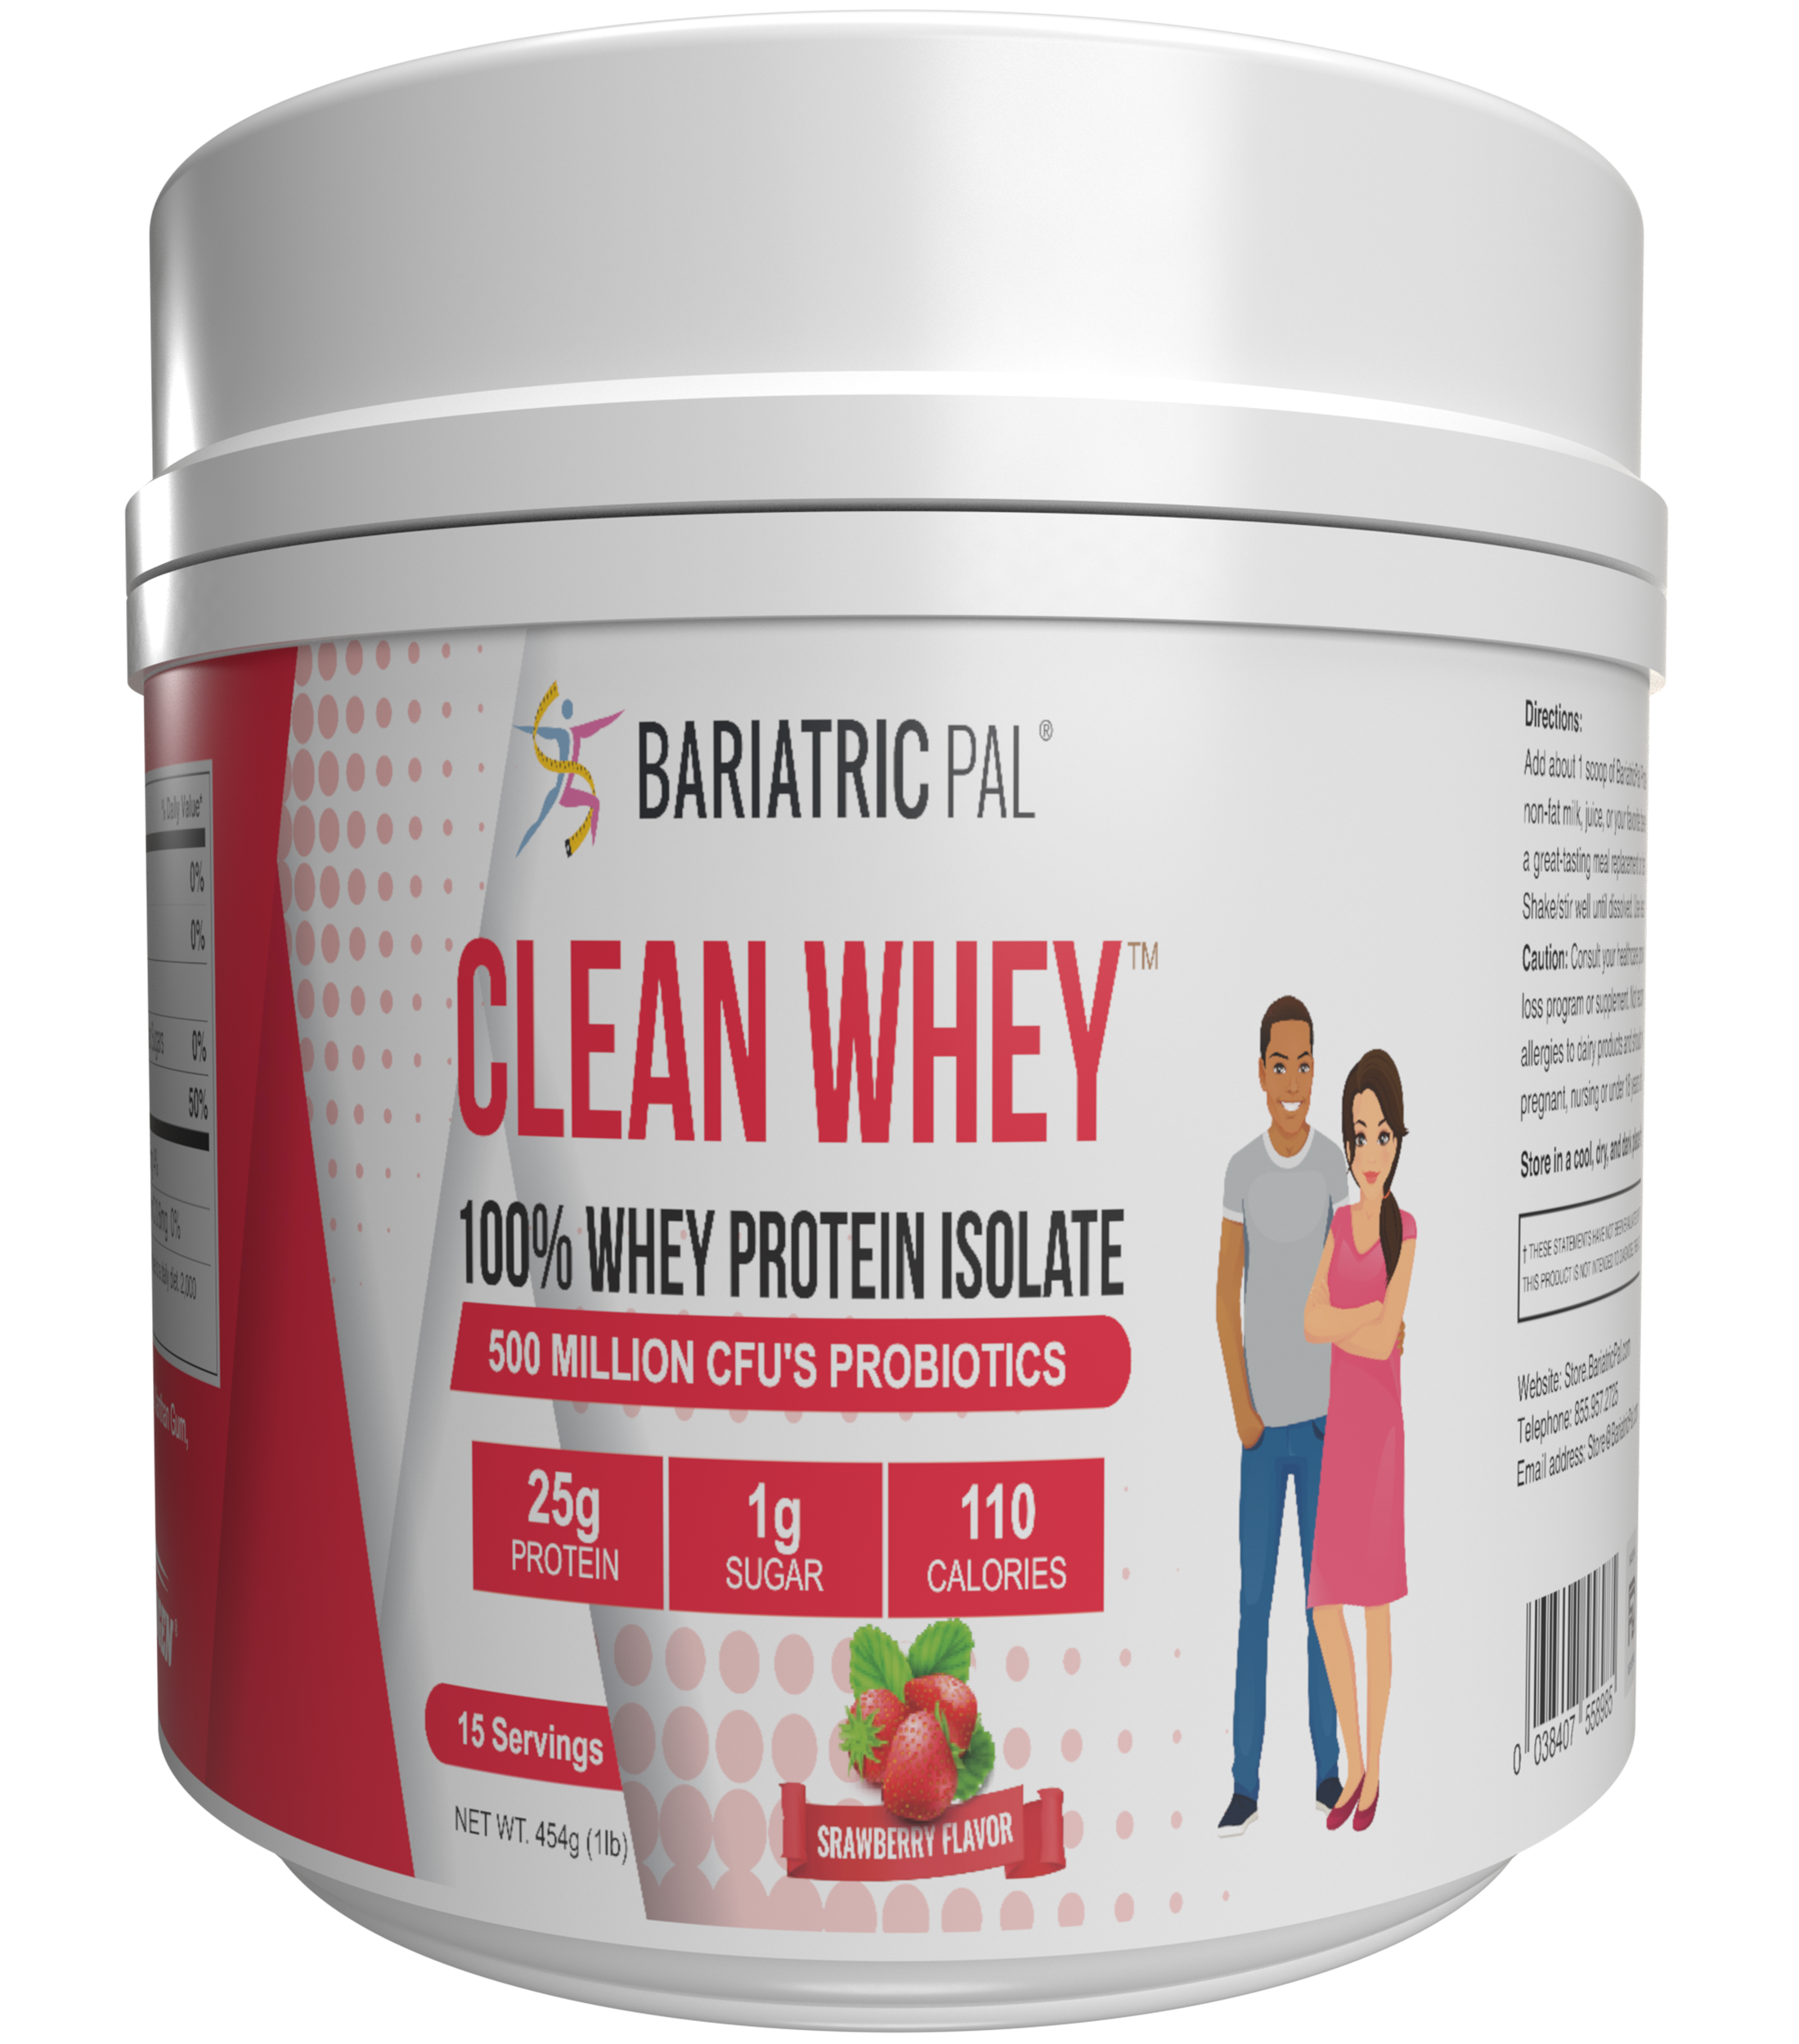 Clean Whey™ Protein (25g) by BariatricPal with Probiotics - Strawberry (15 Servings) - High-quality Protein Powder Tubs by BariatricPal at 